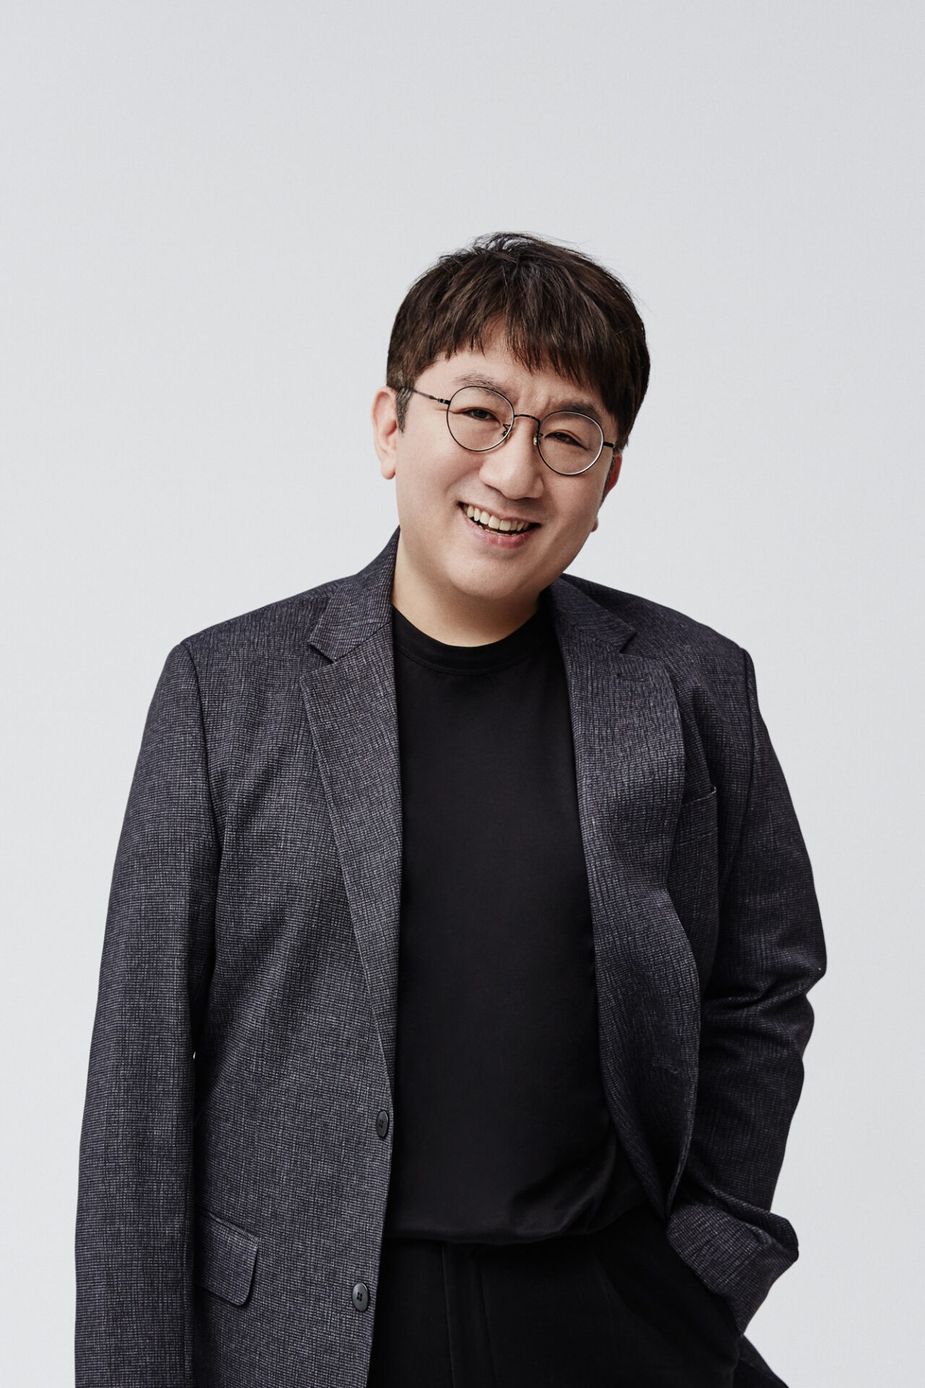 5 Reasons Why Bang Si Hyuk Is Enemy #1 Right Now